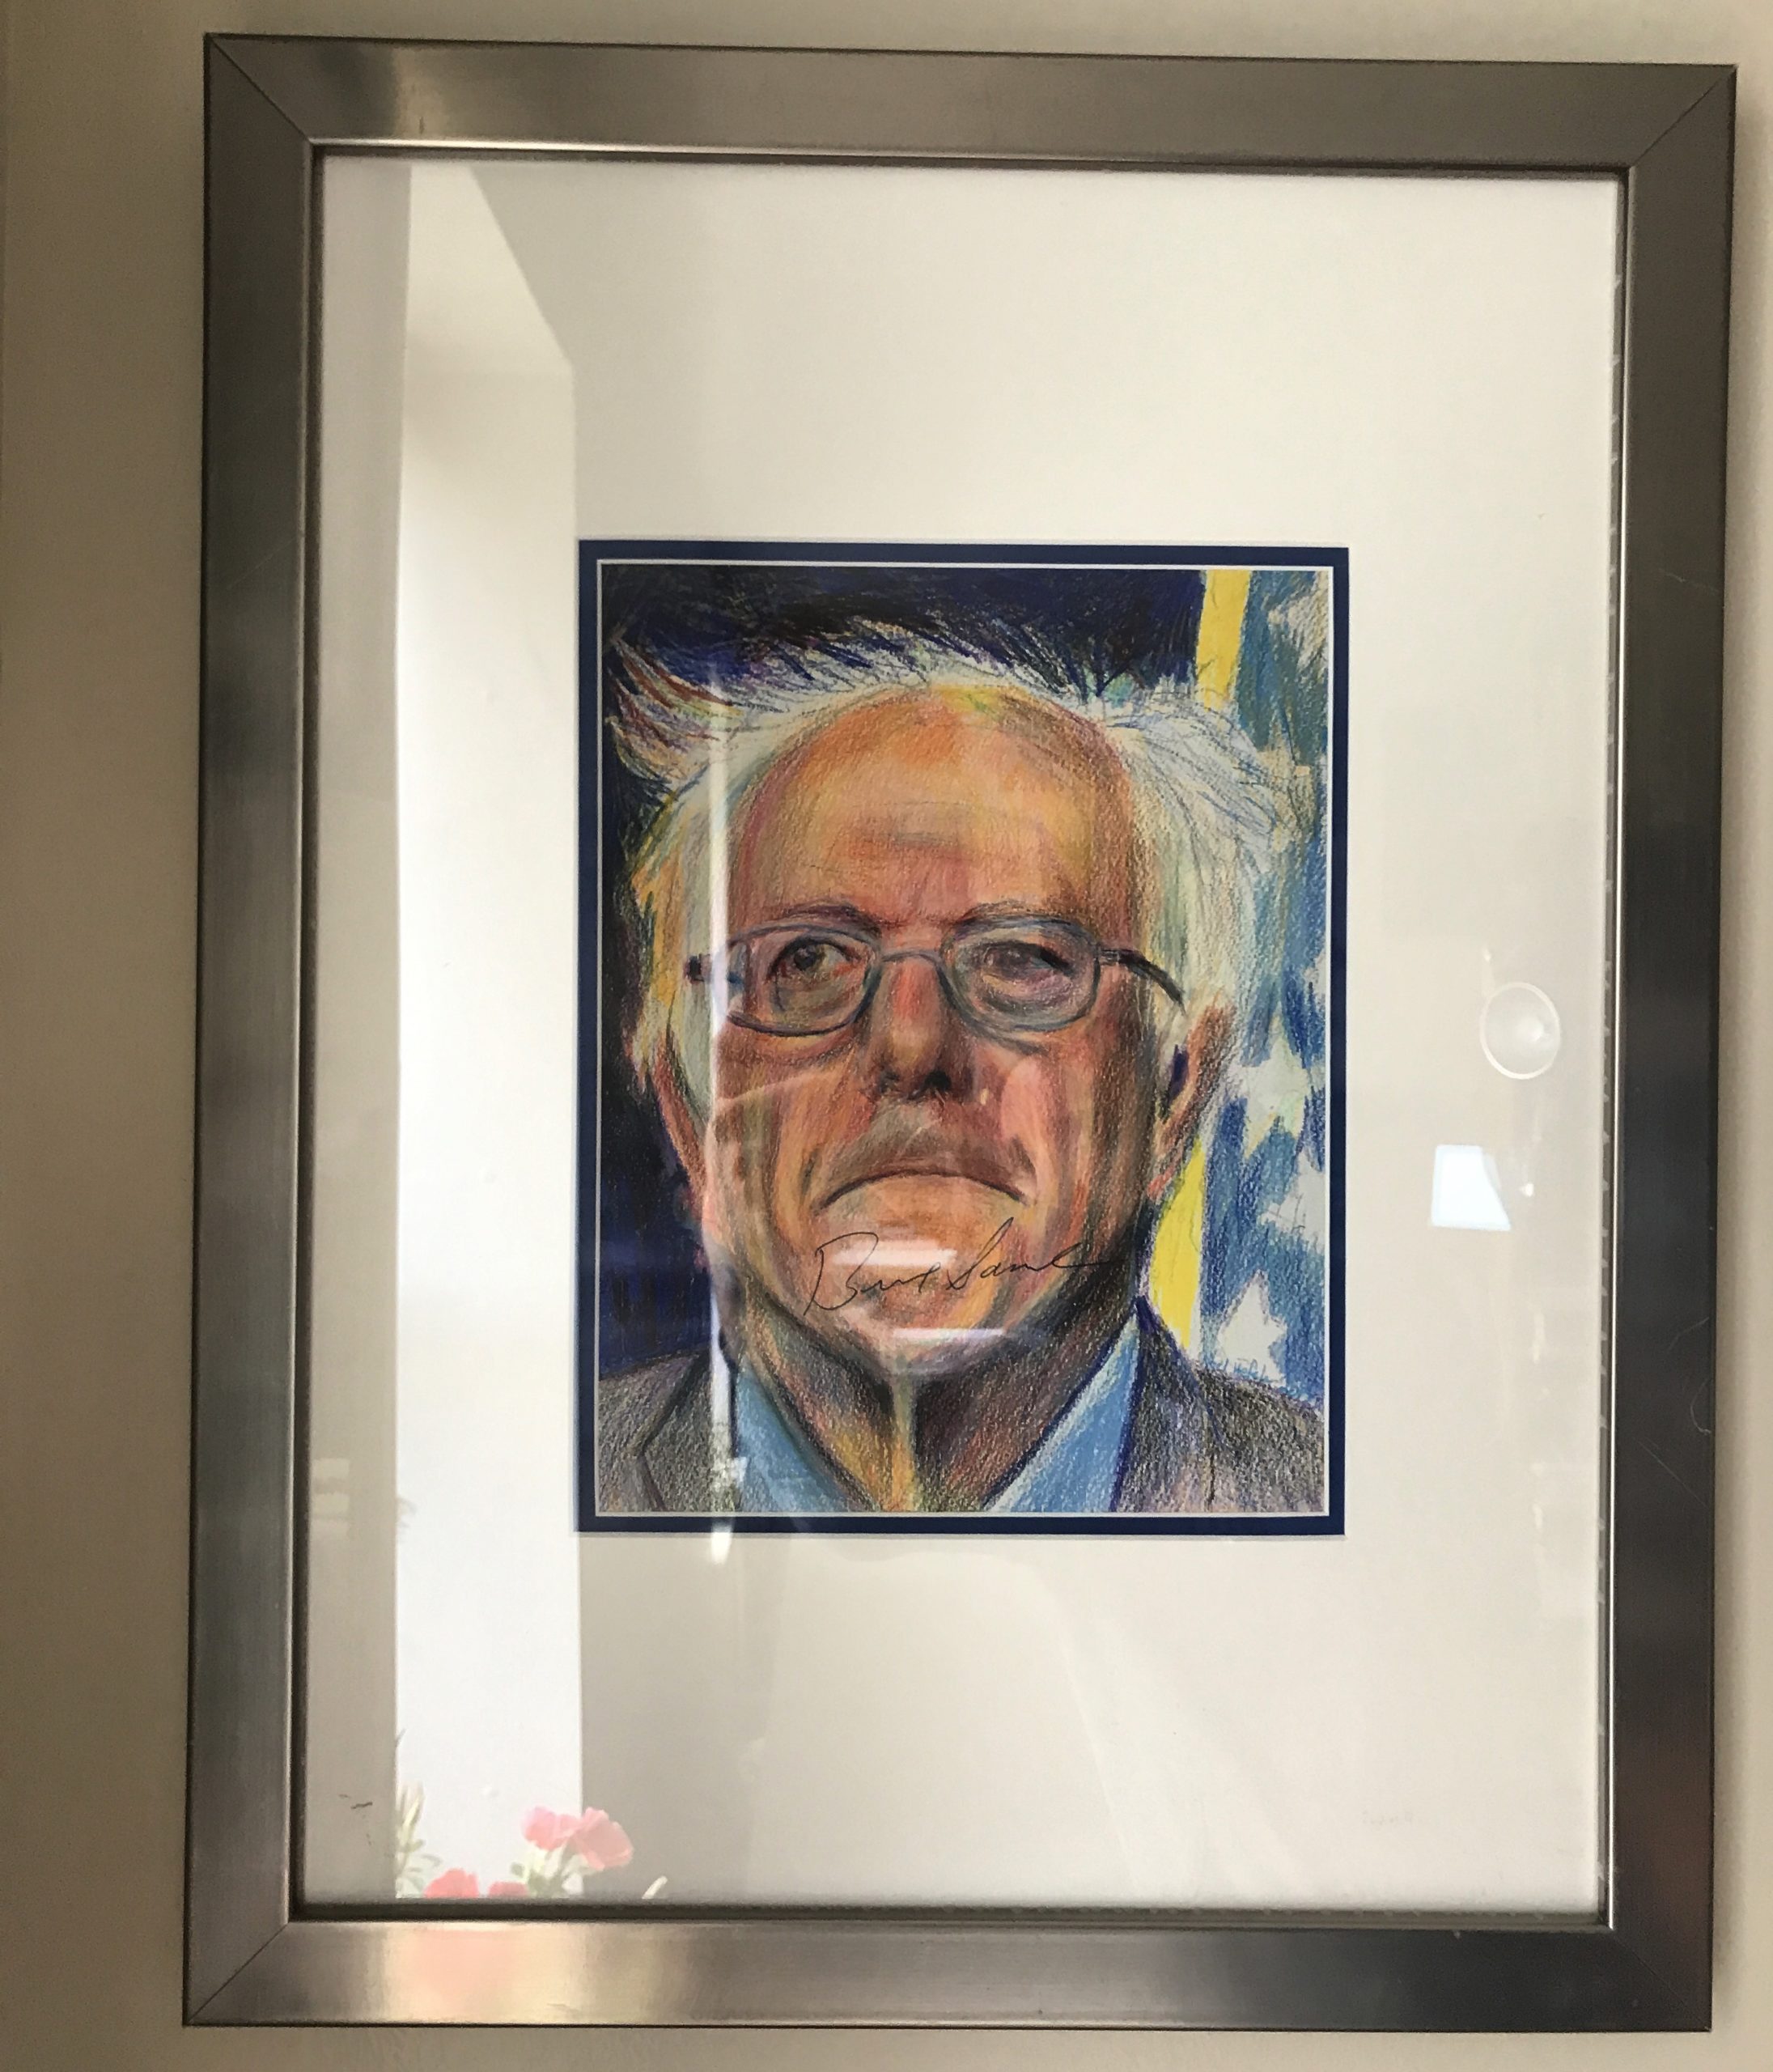 Bernie Sanders autographed a print of my drawing of him.